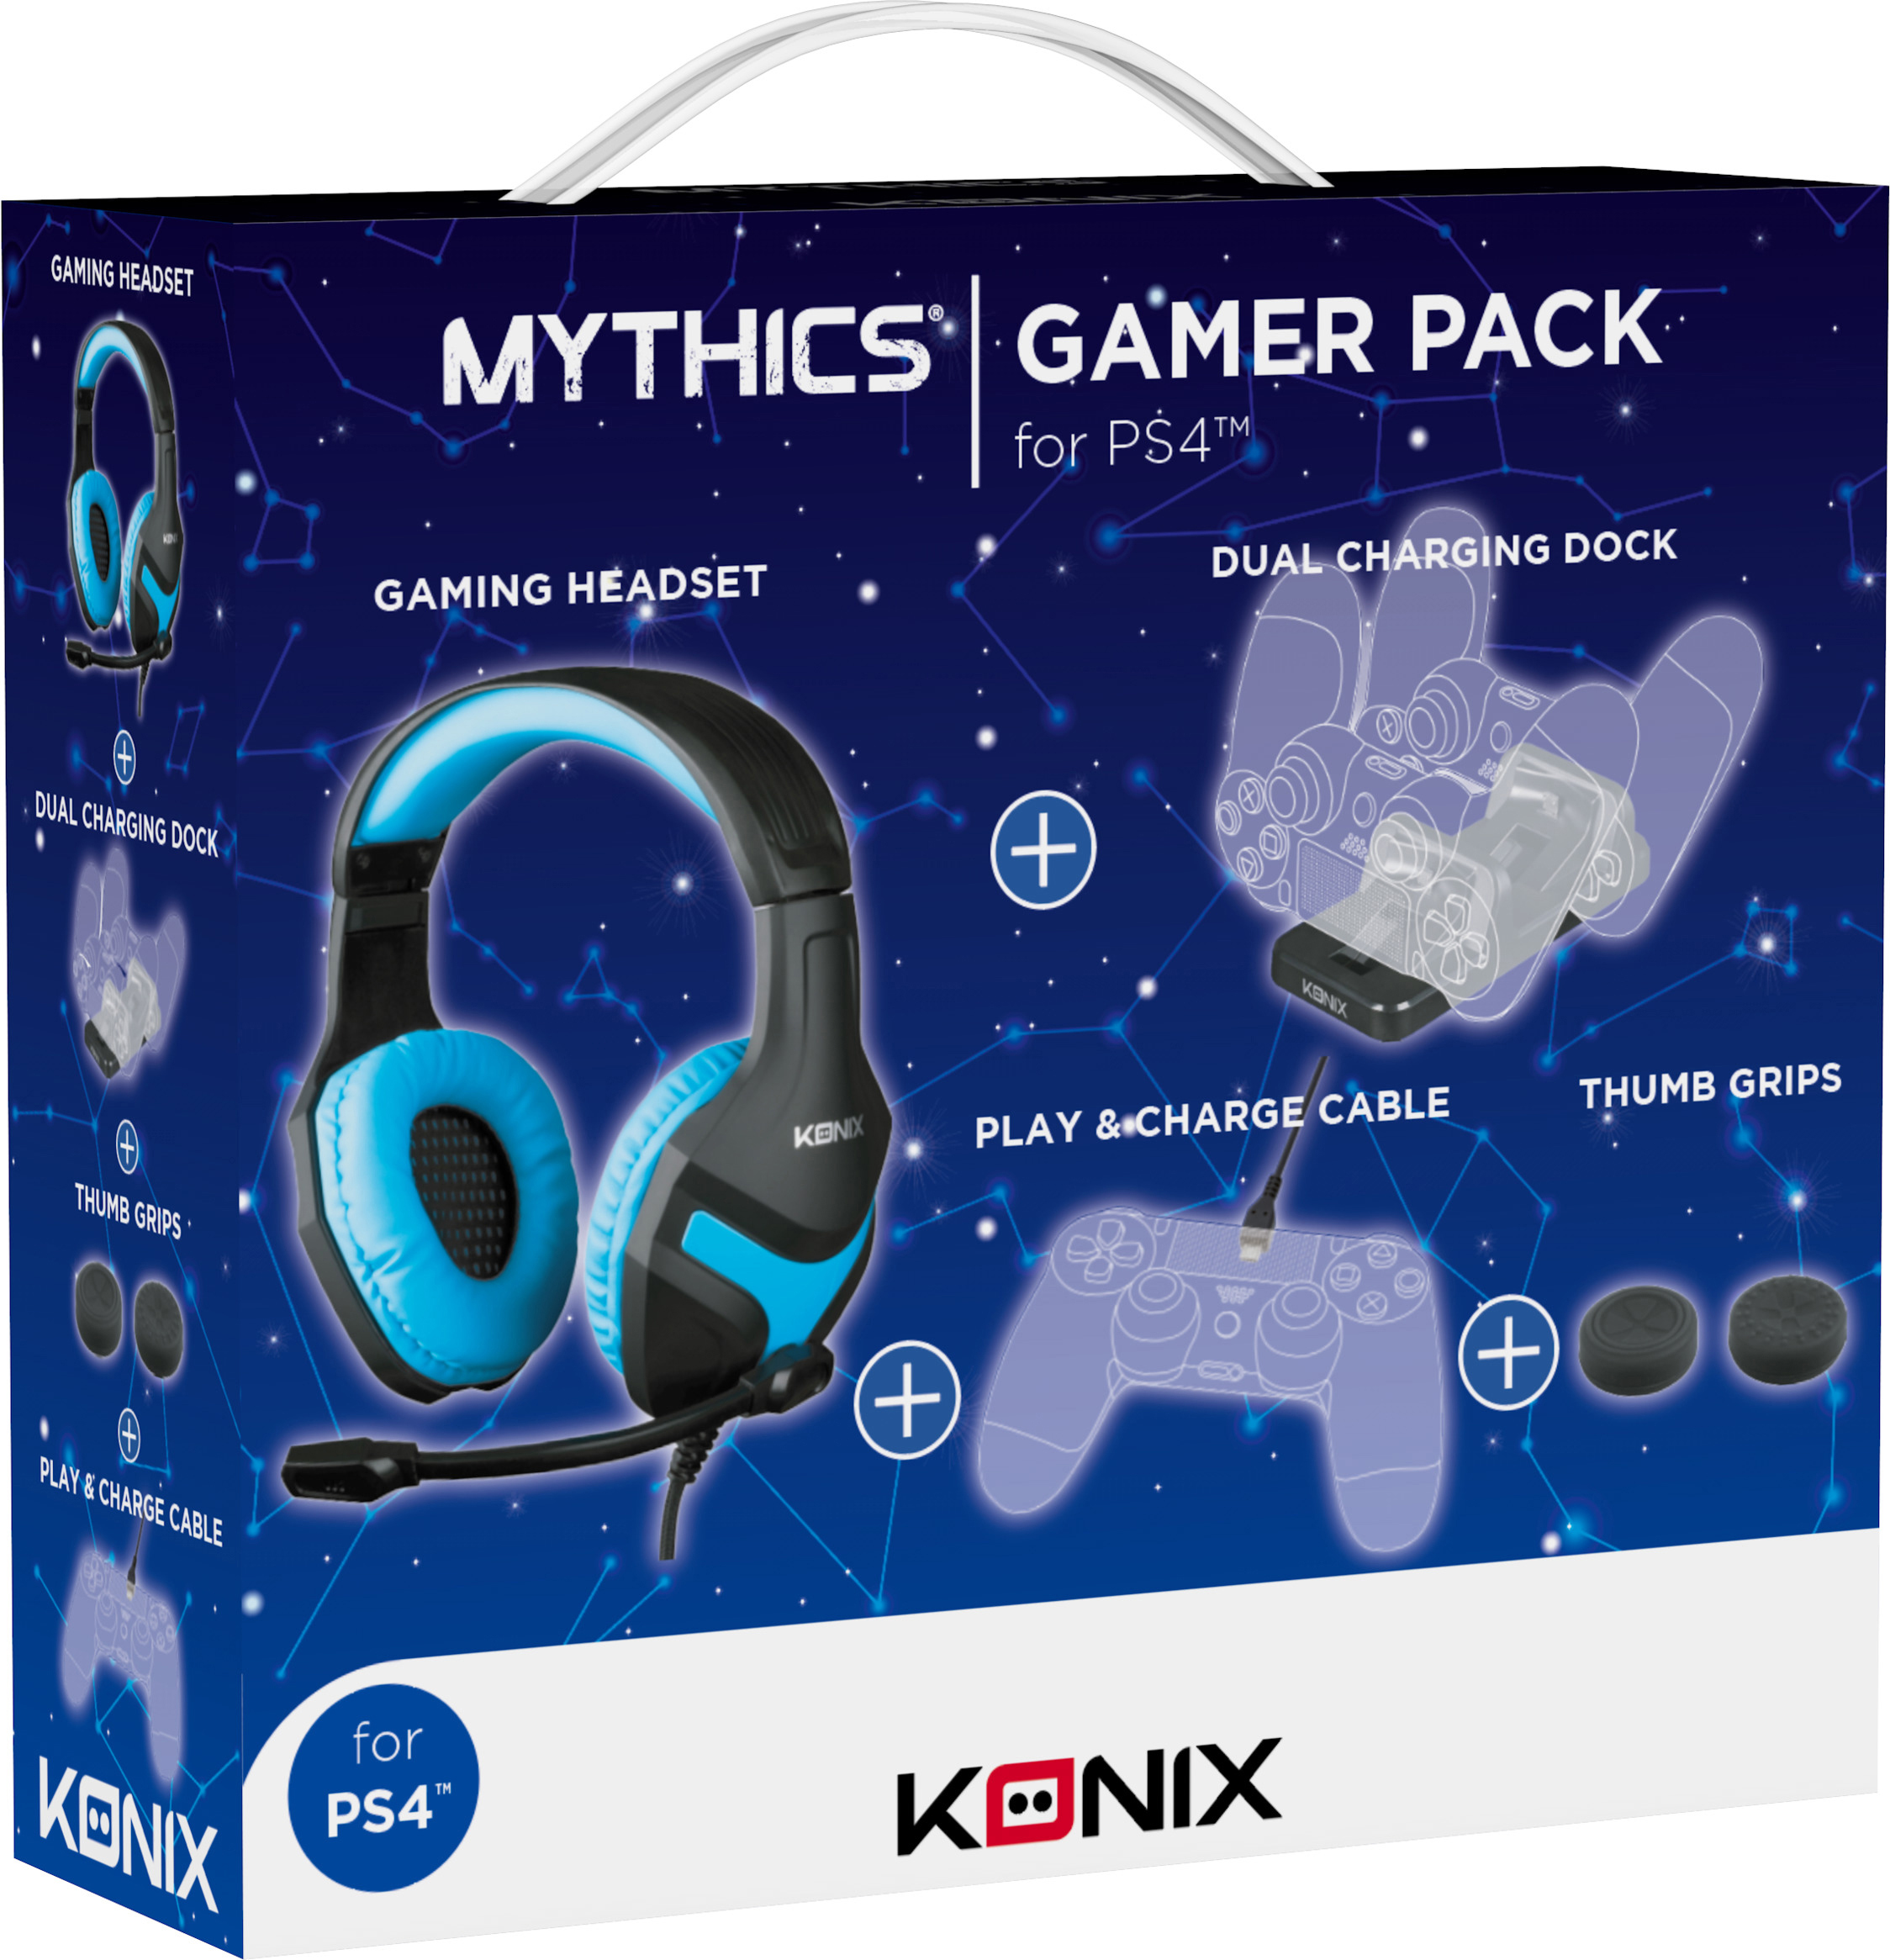 +Charger+Cable+Grips), Pack Gamer Schwarz/Blau KONIX Pack (Headset Gamer PS4 ,